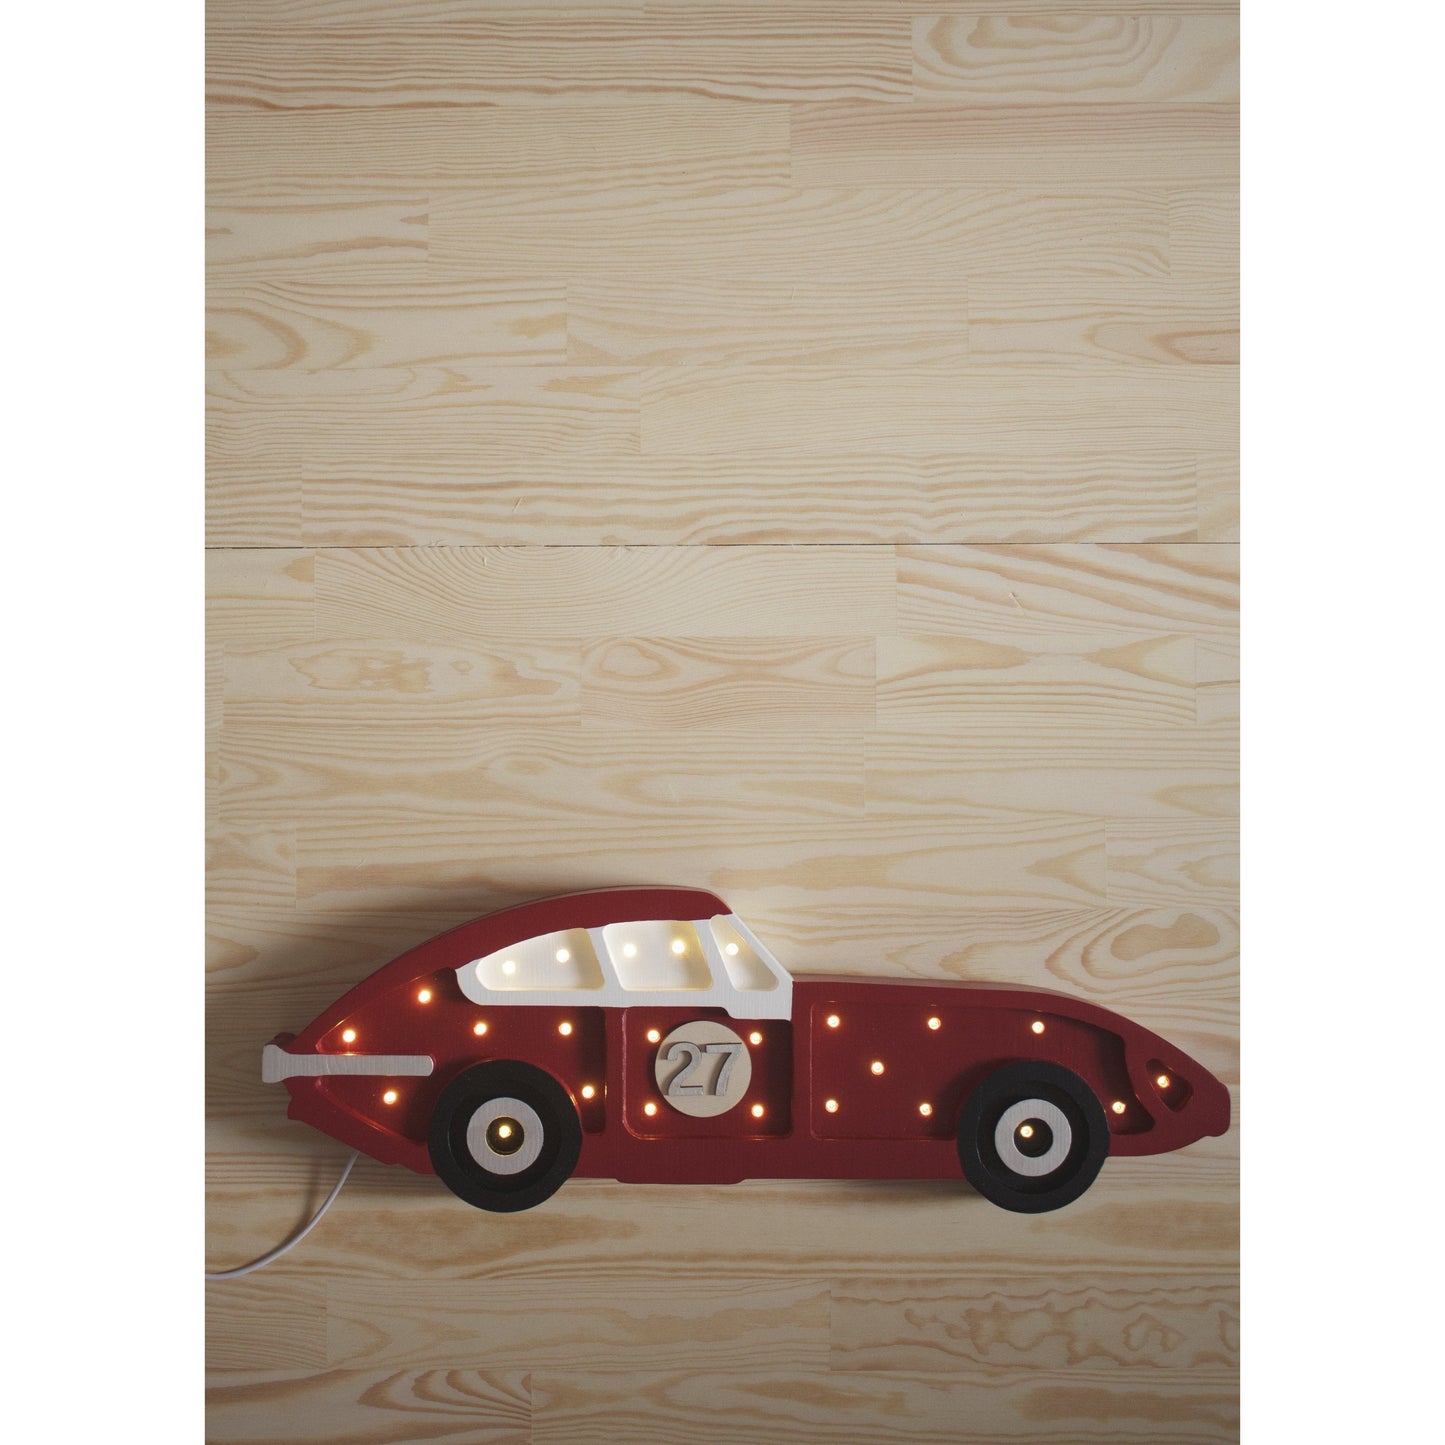 Race Car - Serenity Toys Boutique